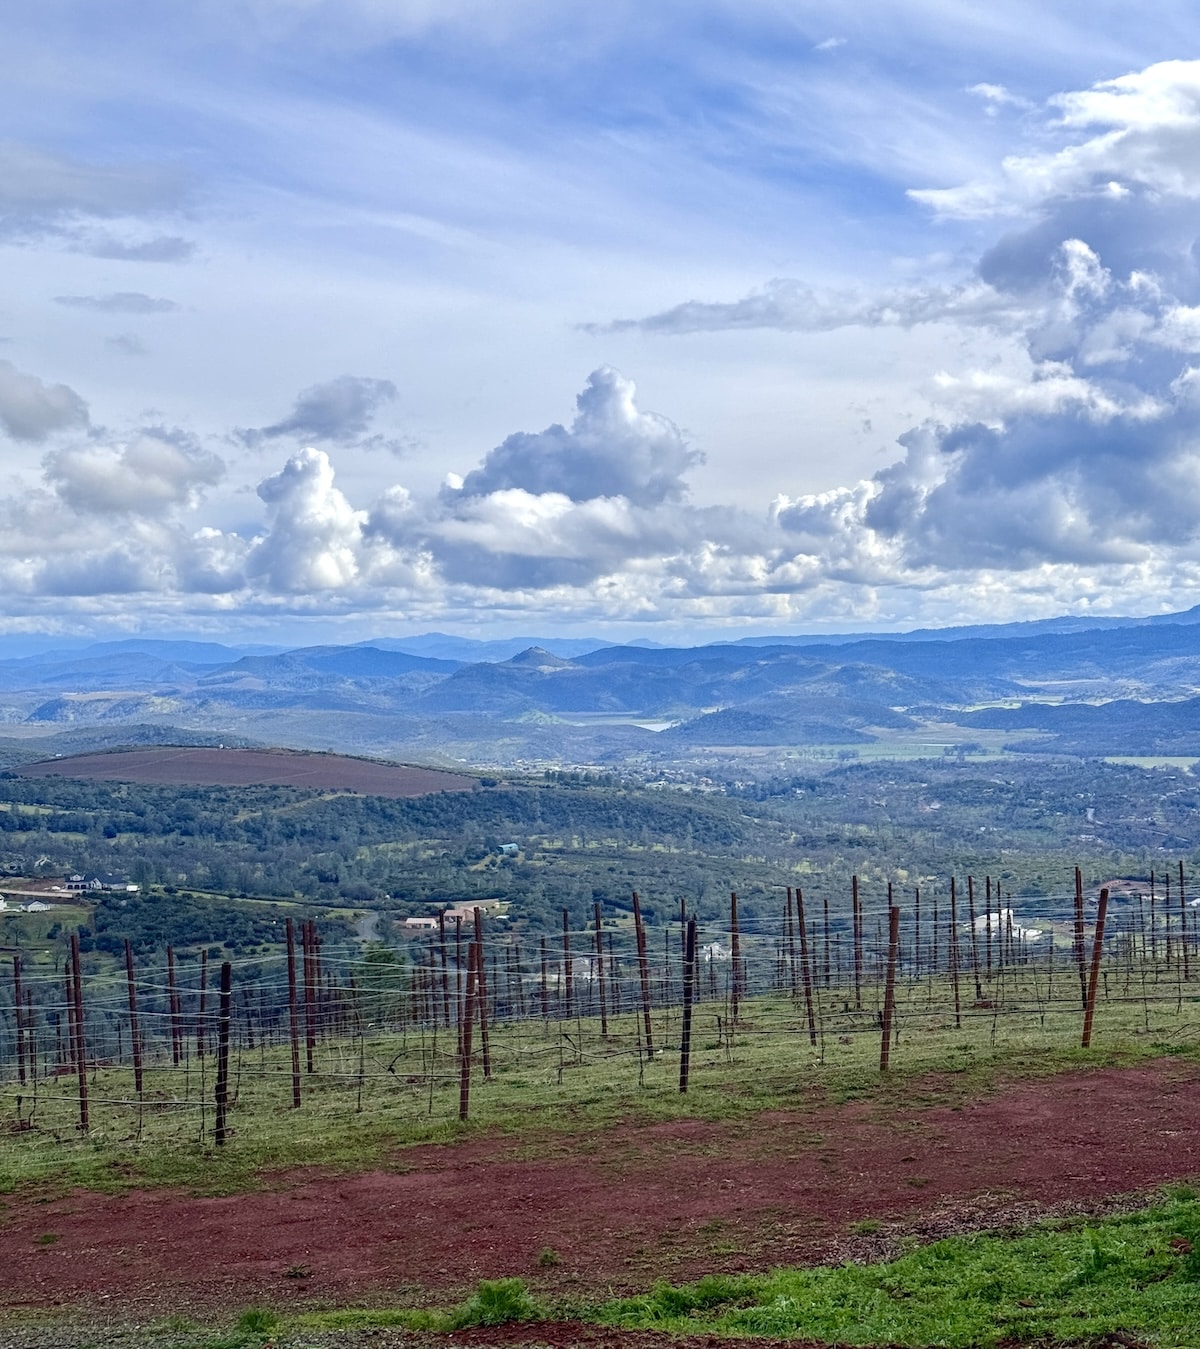 View of mountains behind a vineyard.